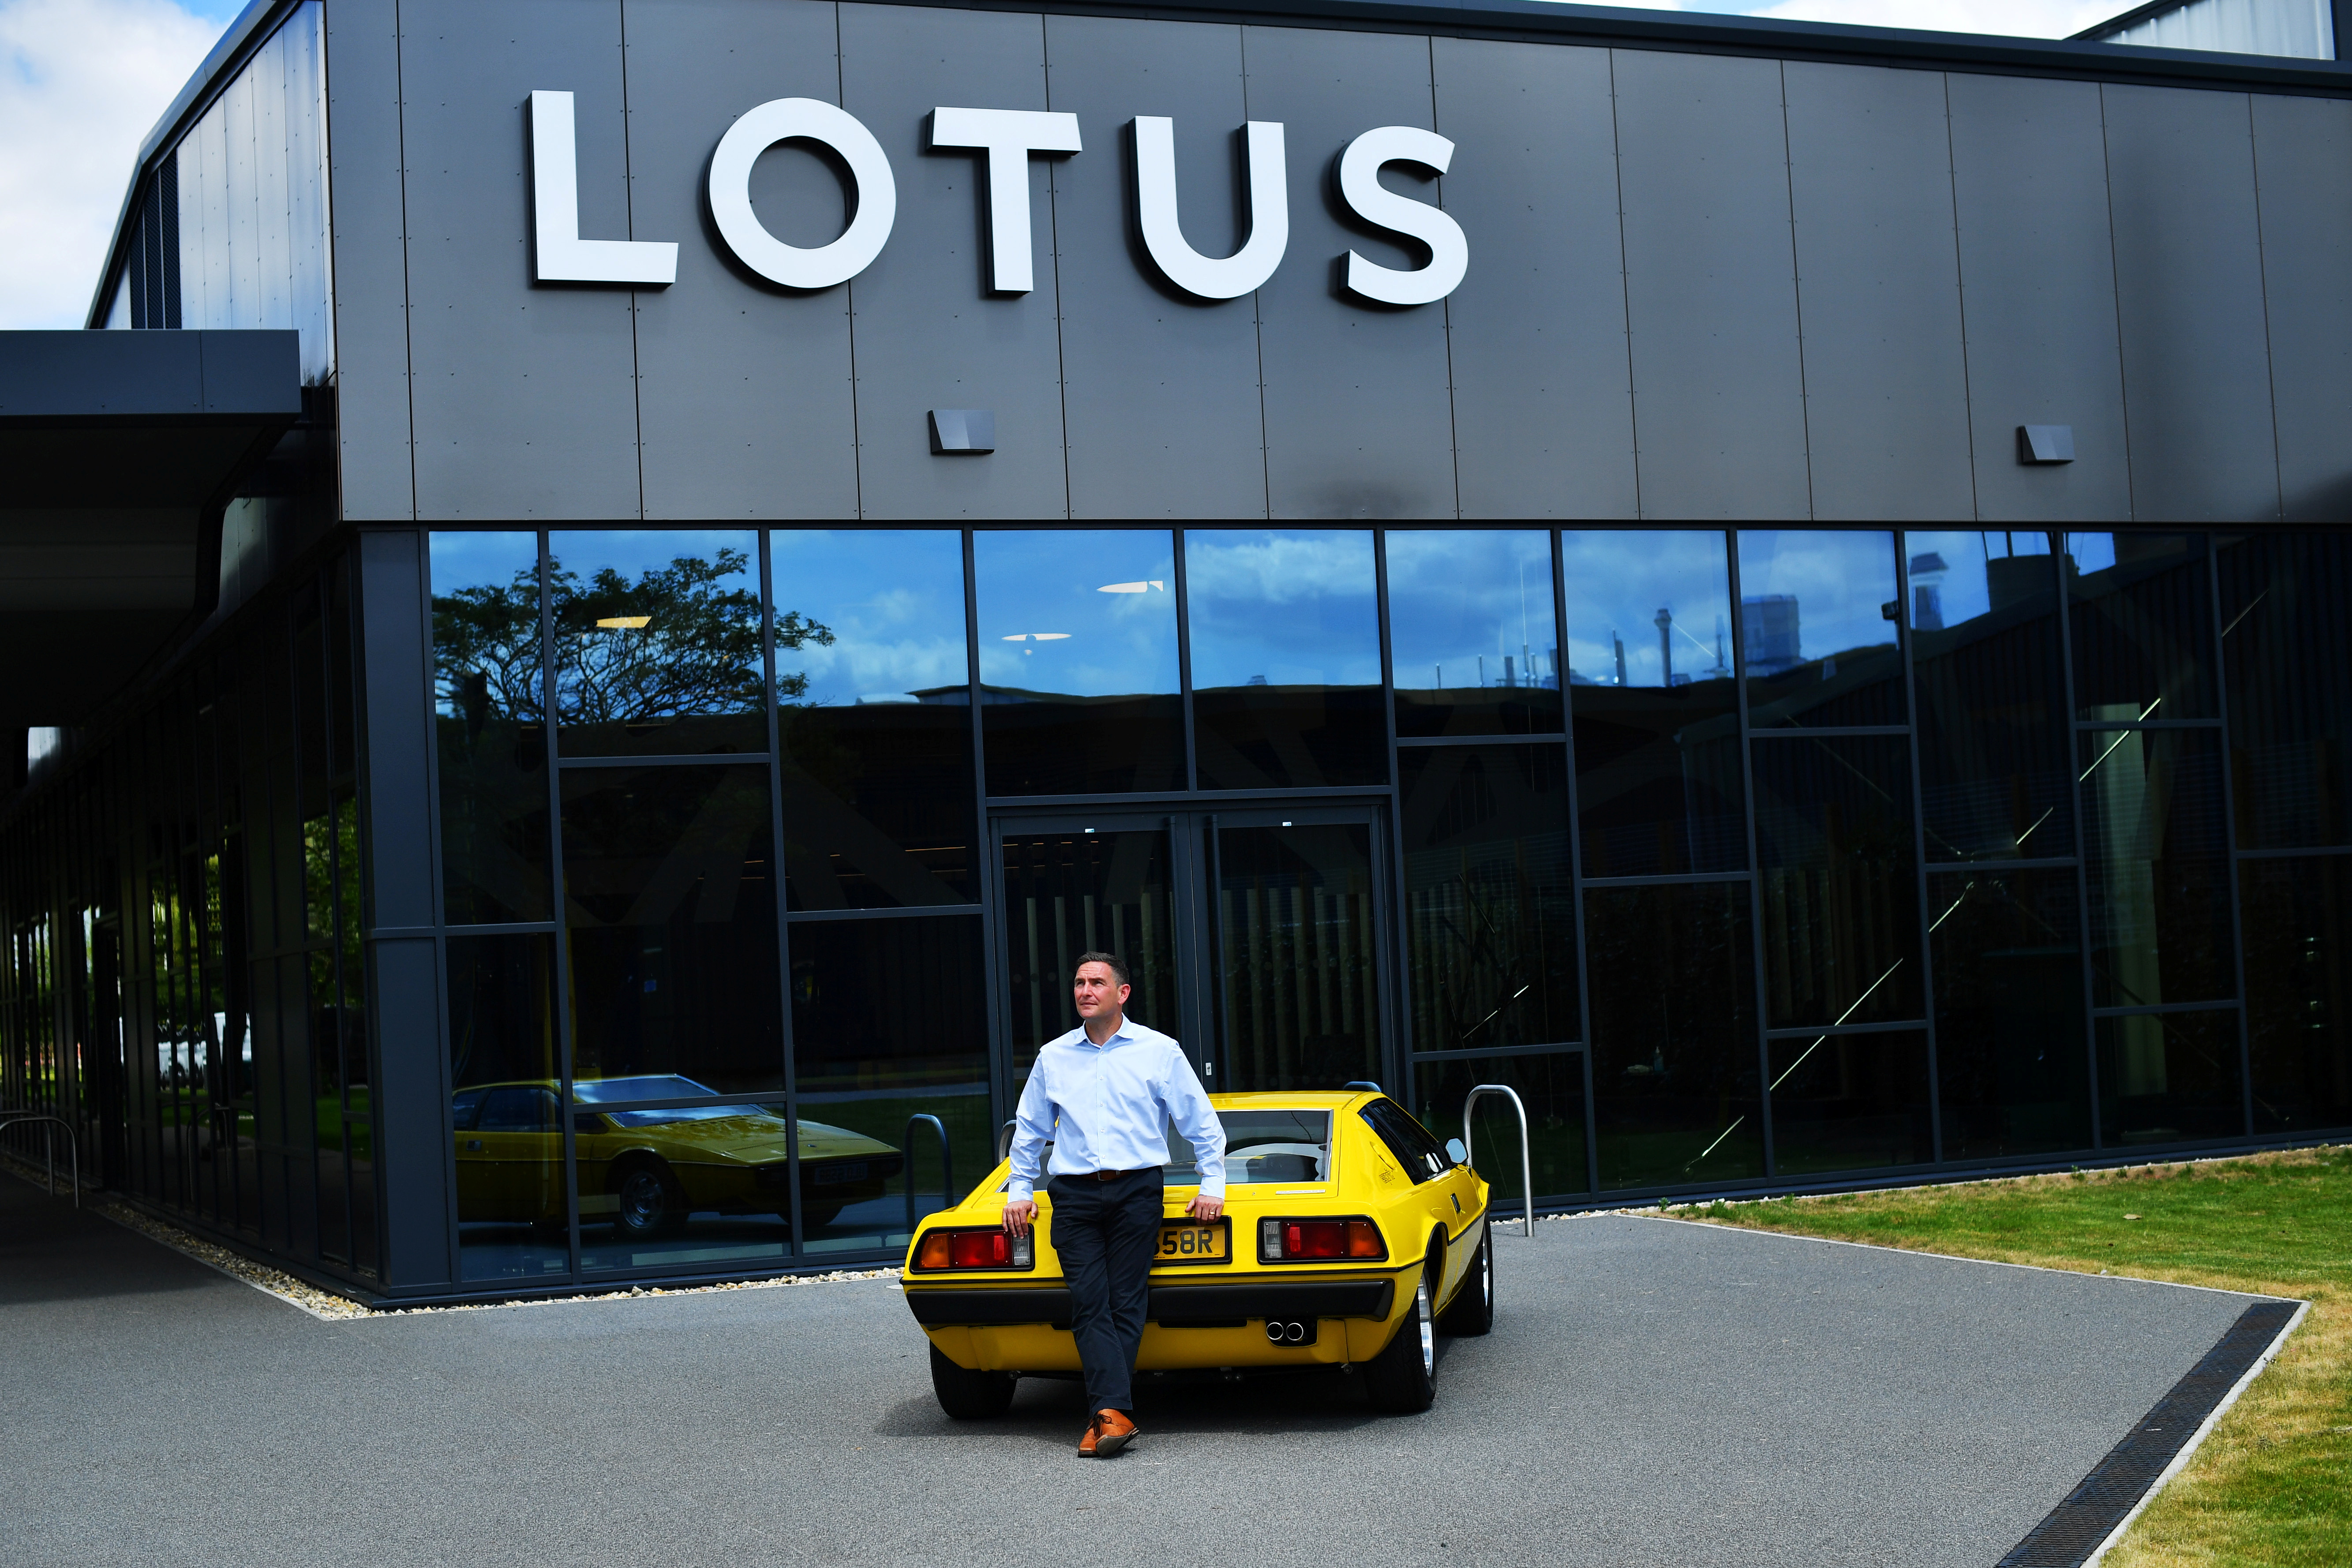 Managing Director of Lotus, Matt Windle stands with a Lotus Esprit car at the company's plant in Hethel